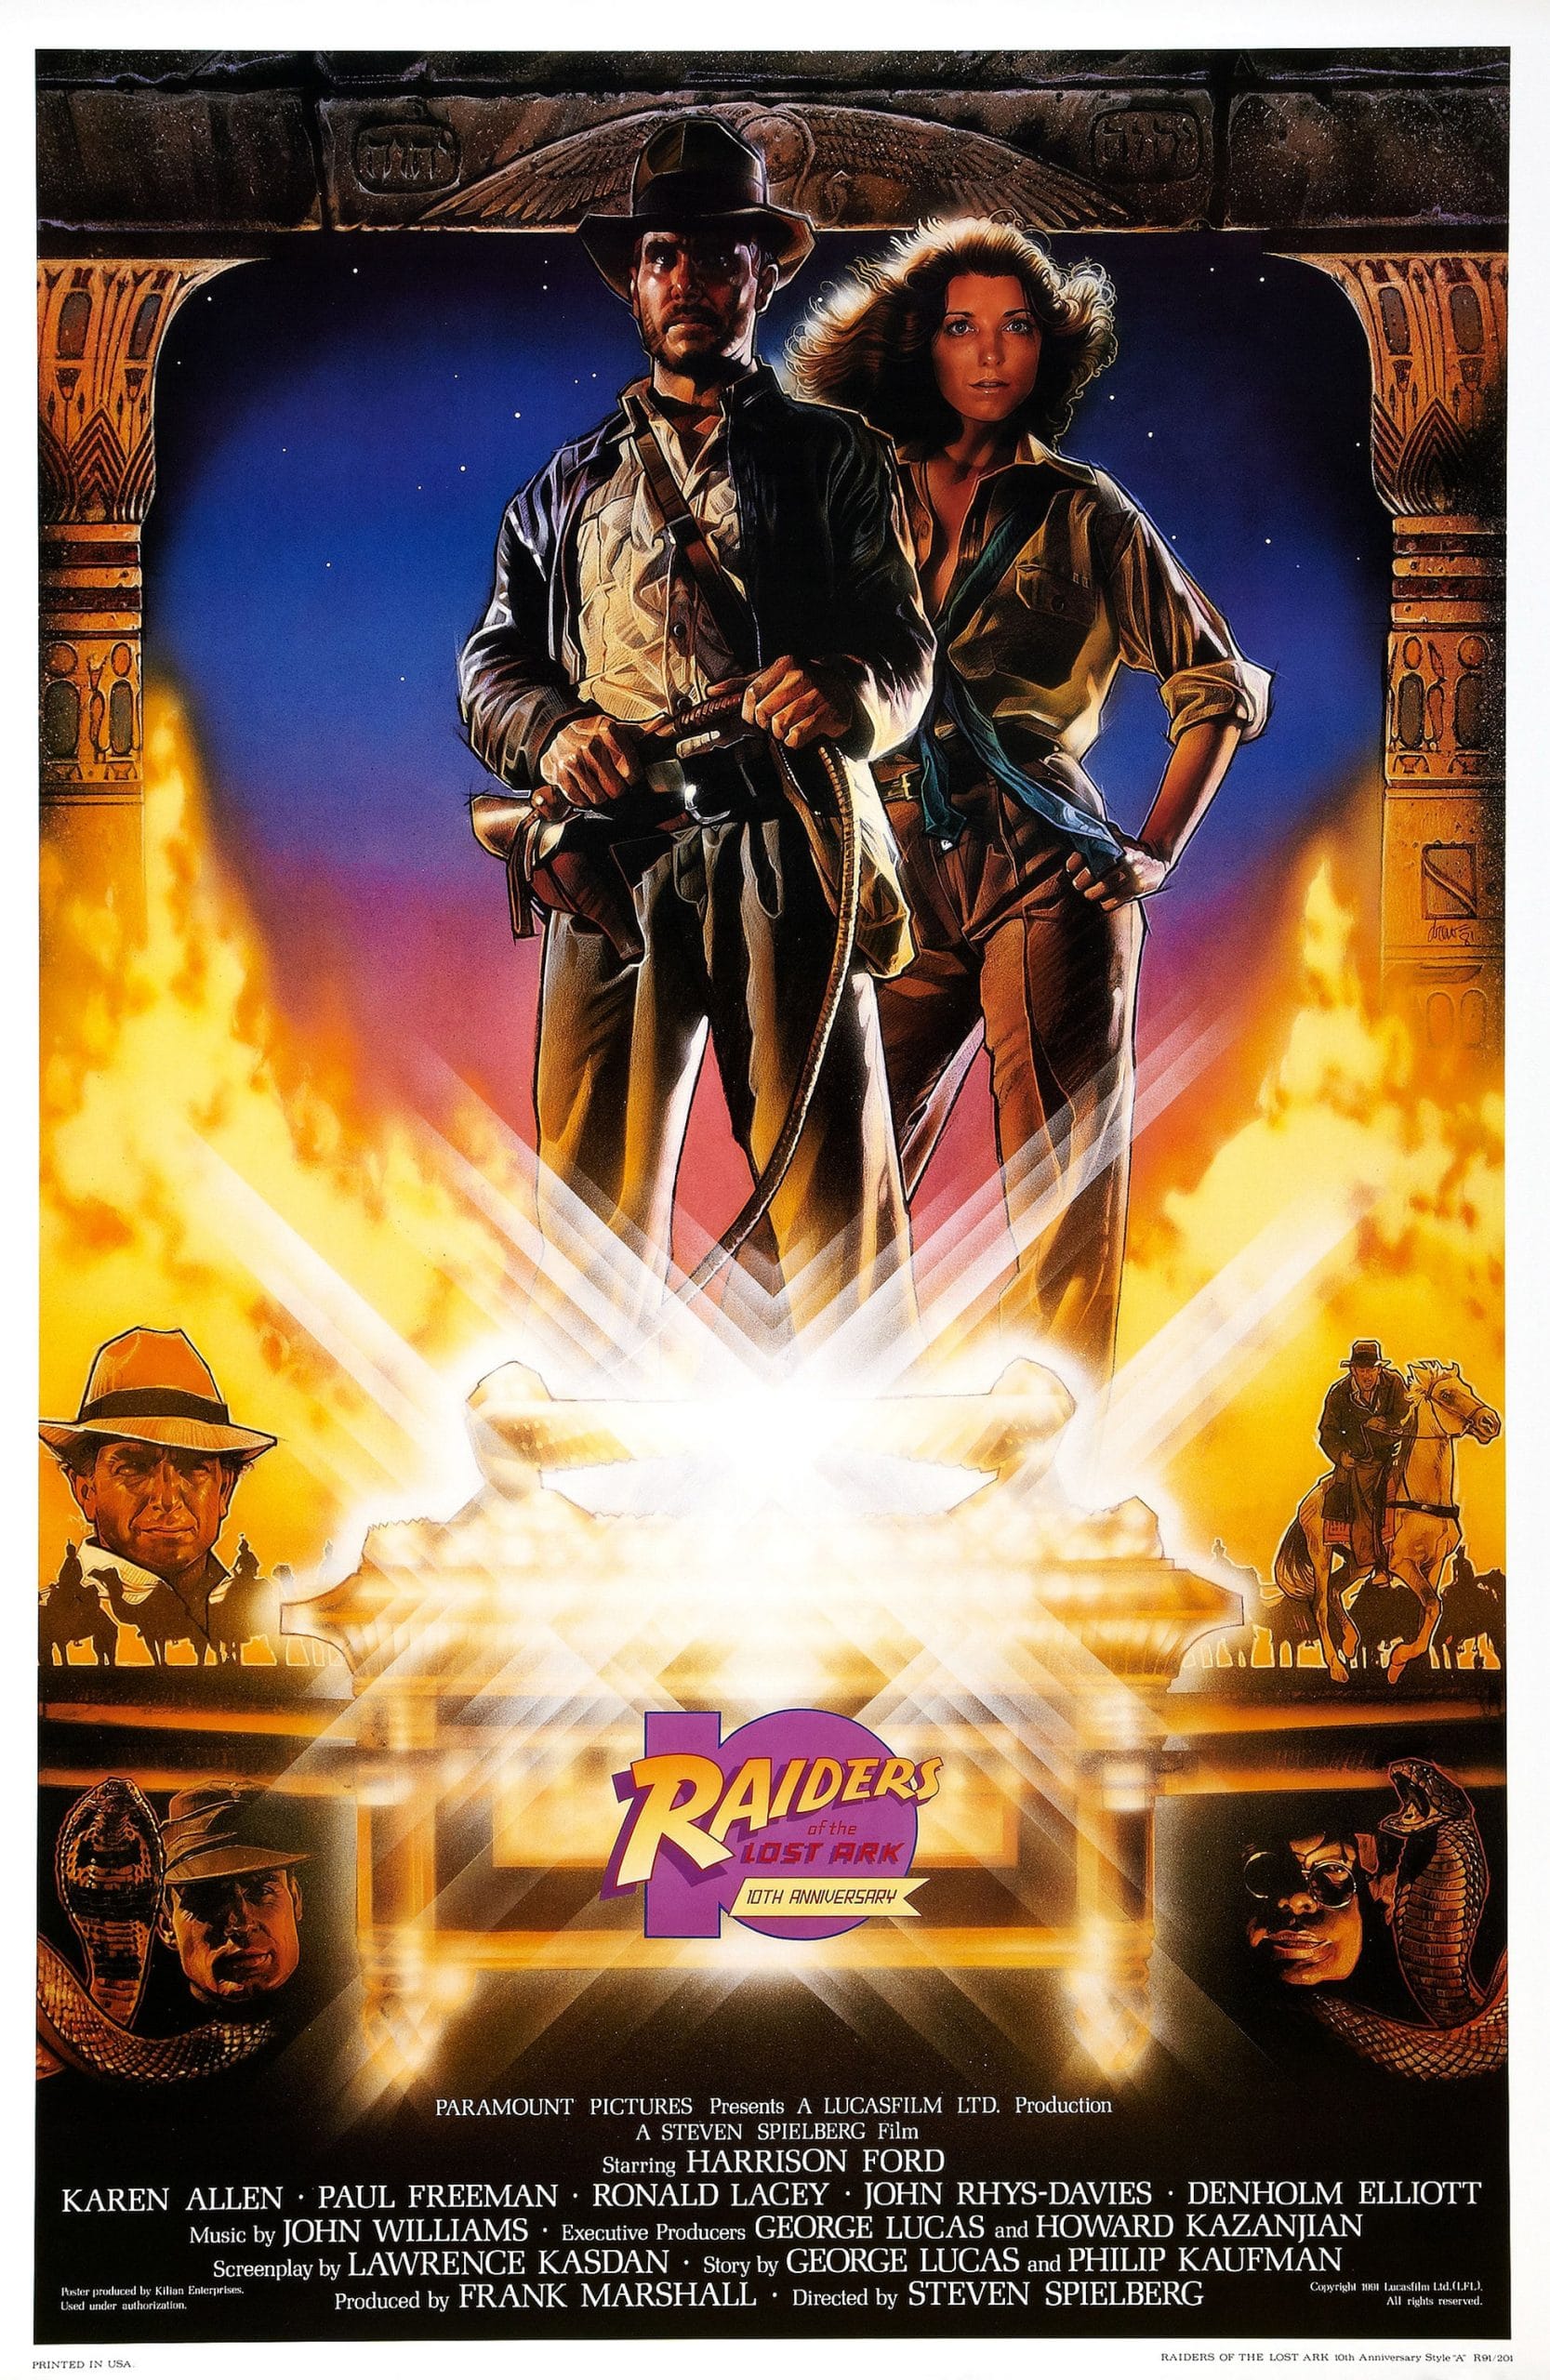 RAIDERS OF THE LOST ARK, US 10th anniversary re-issue poster, top, from left: Harrison Ford, Karen Allen, 1981